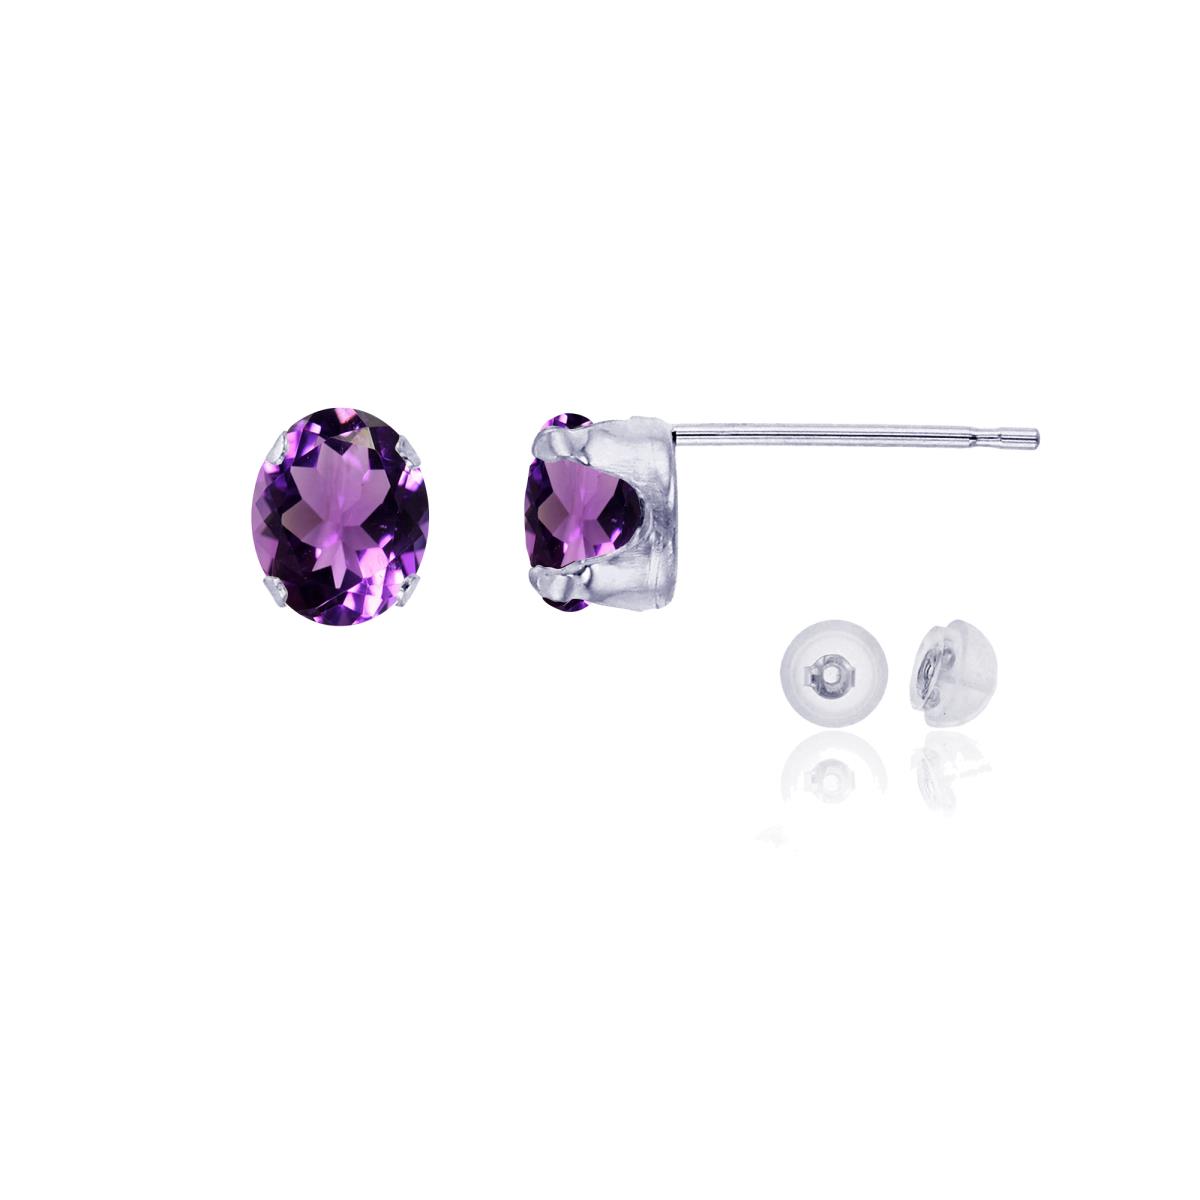 10K White Gold 6x4mm Oval Amethyst Stud Earring with Silicone Back